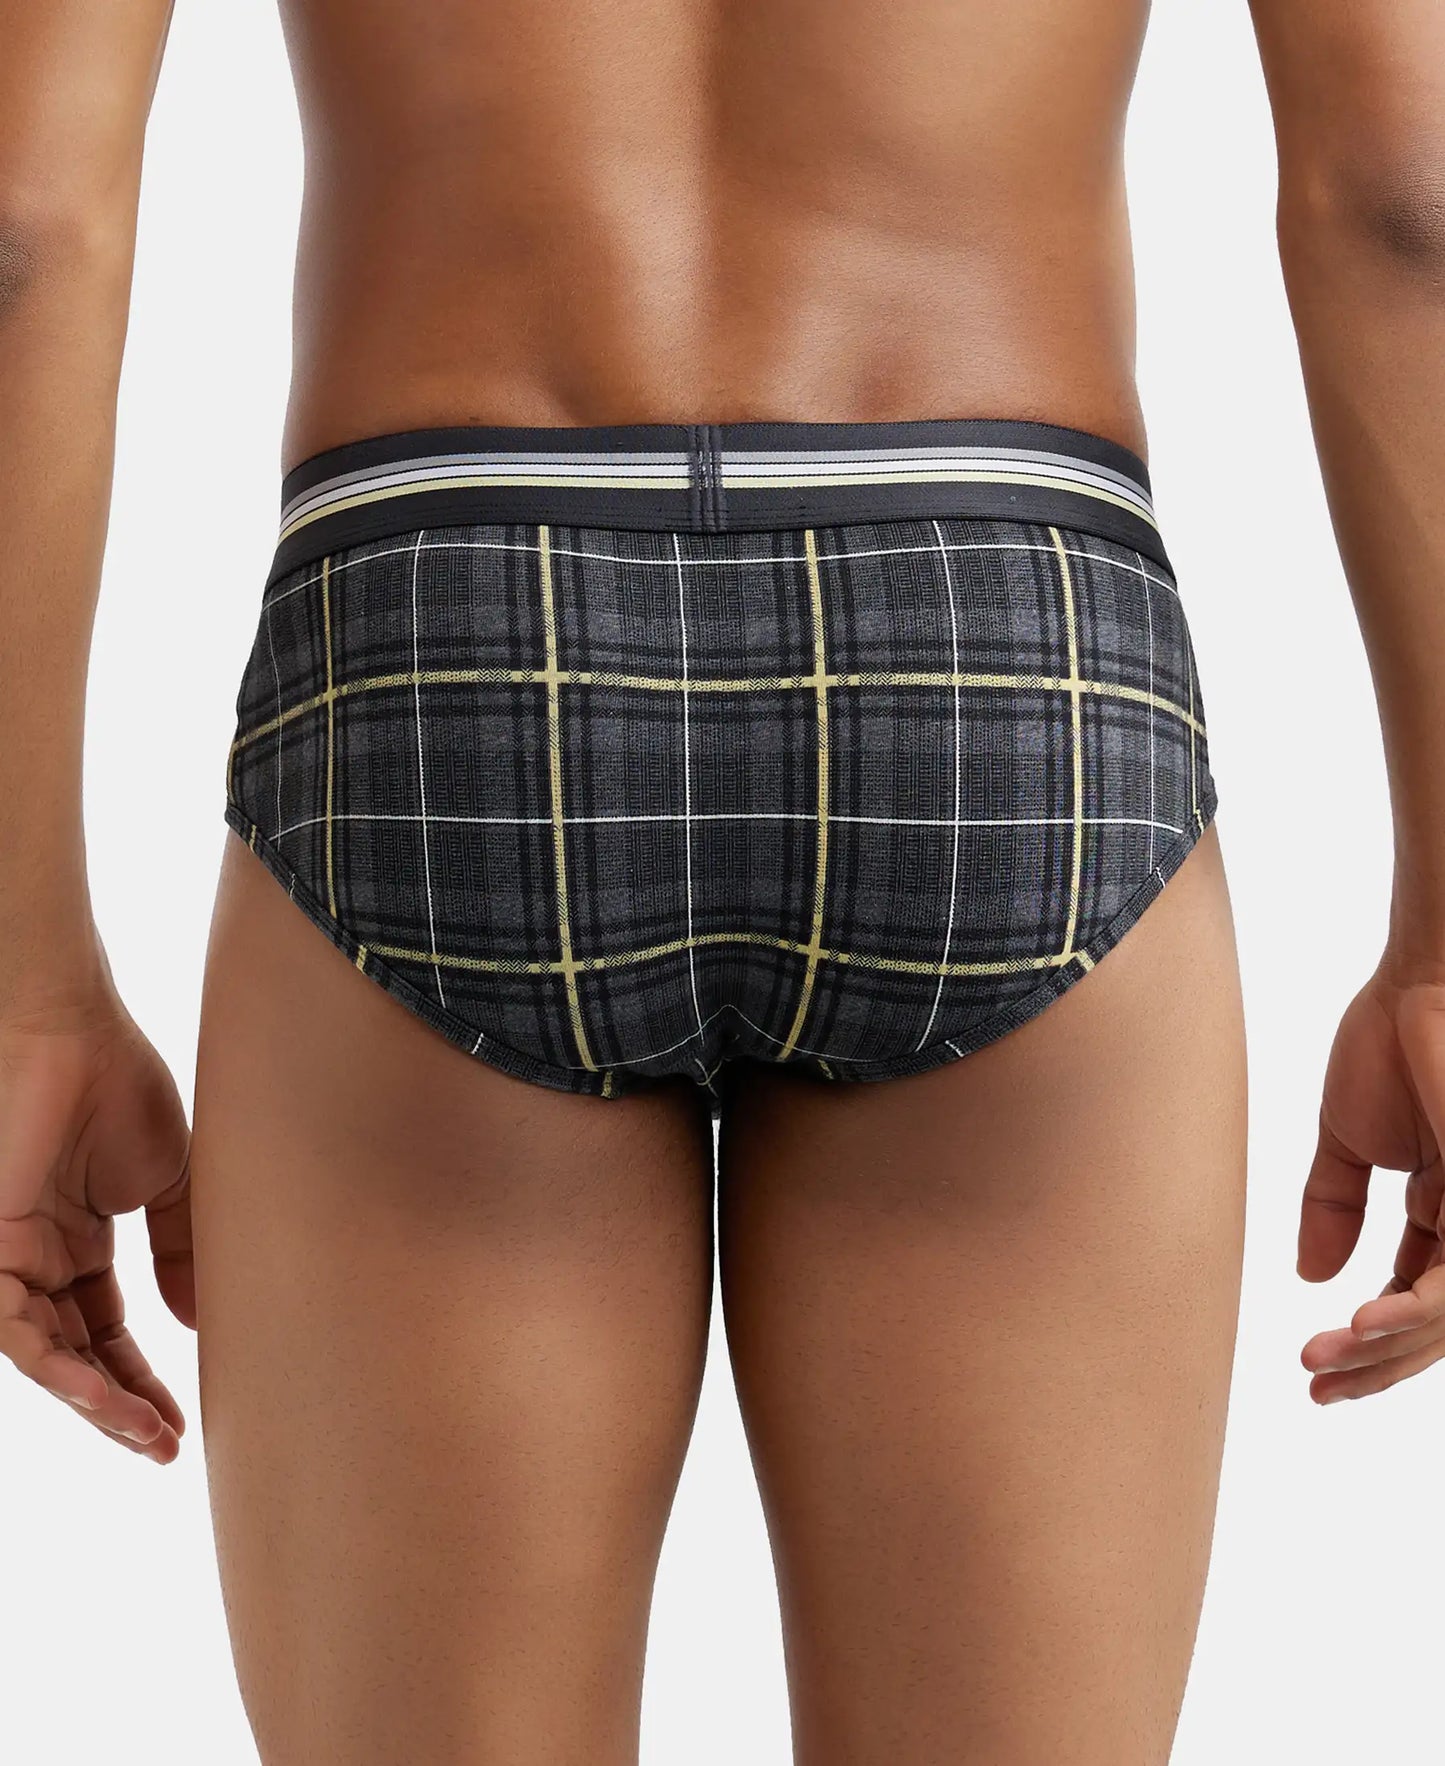 Super Combed Cotton Elastane Printed Brief with Ultrasoft Waistband - Charcoal Melange Print-7